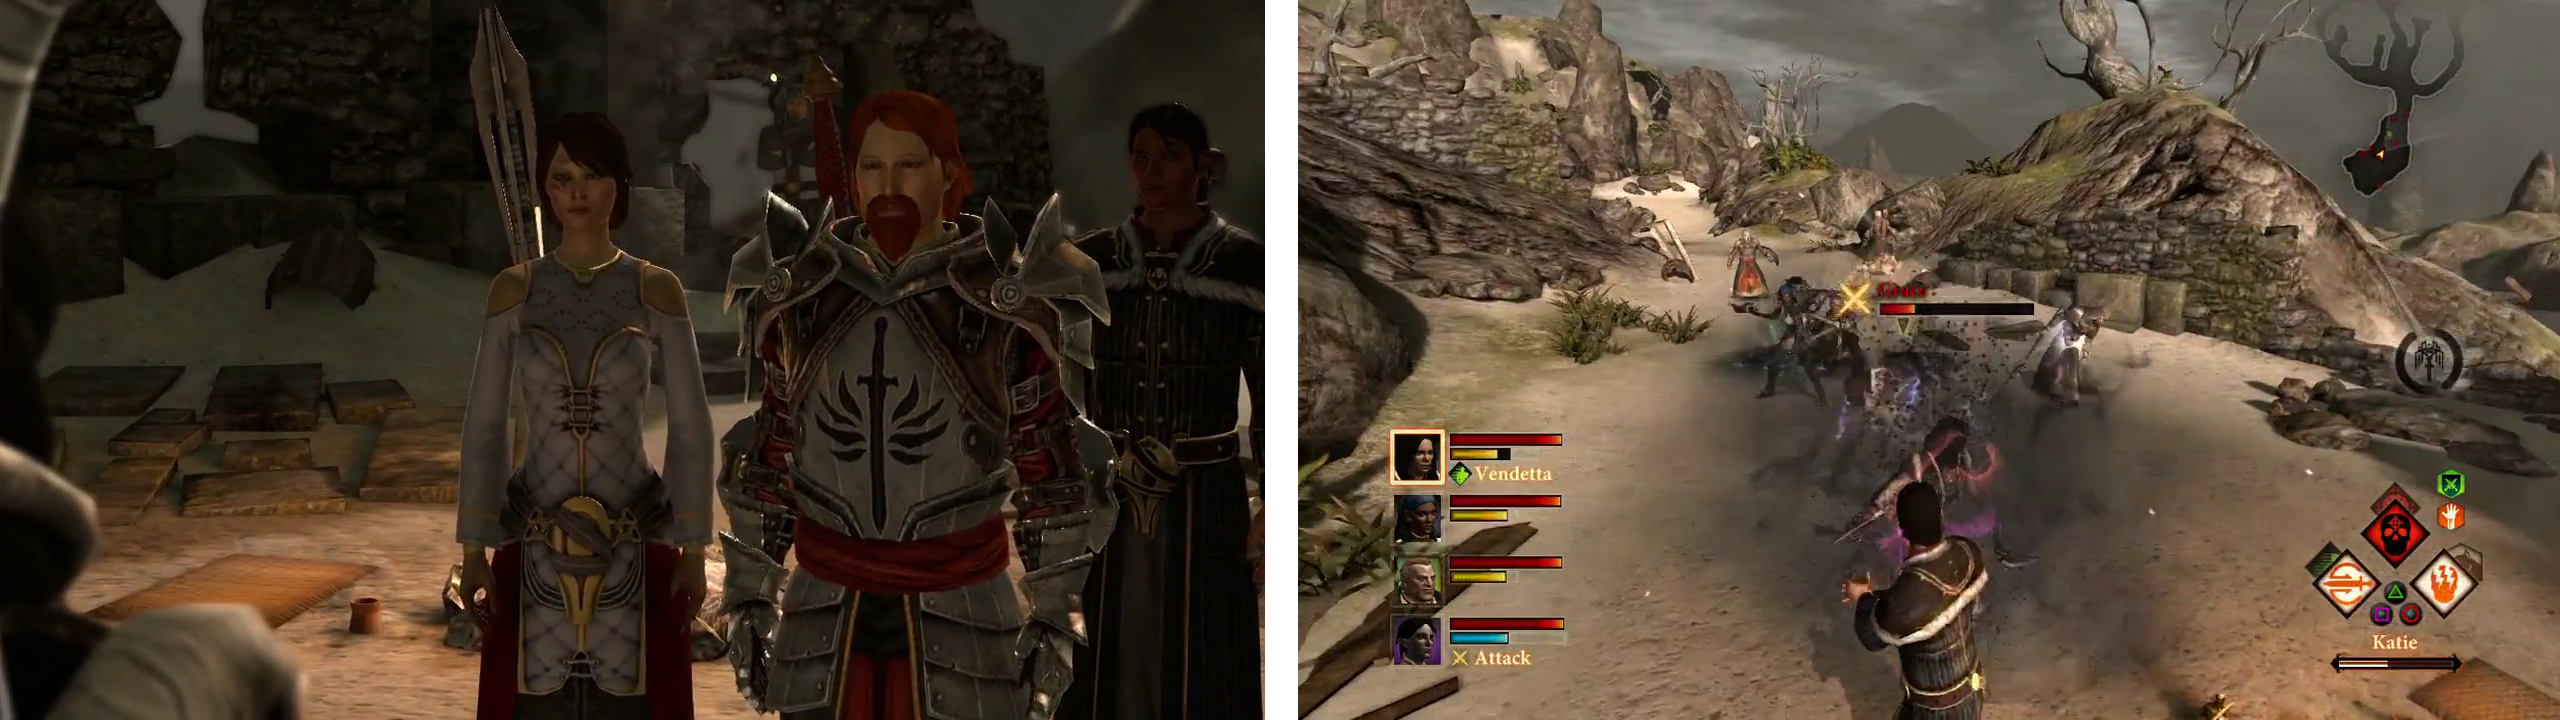 Find Thrask on the beach in the Wounded Coast (left) and then defeat Grace and the other enemies nearby.